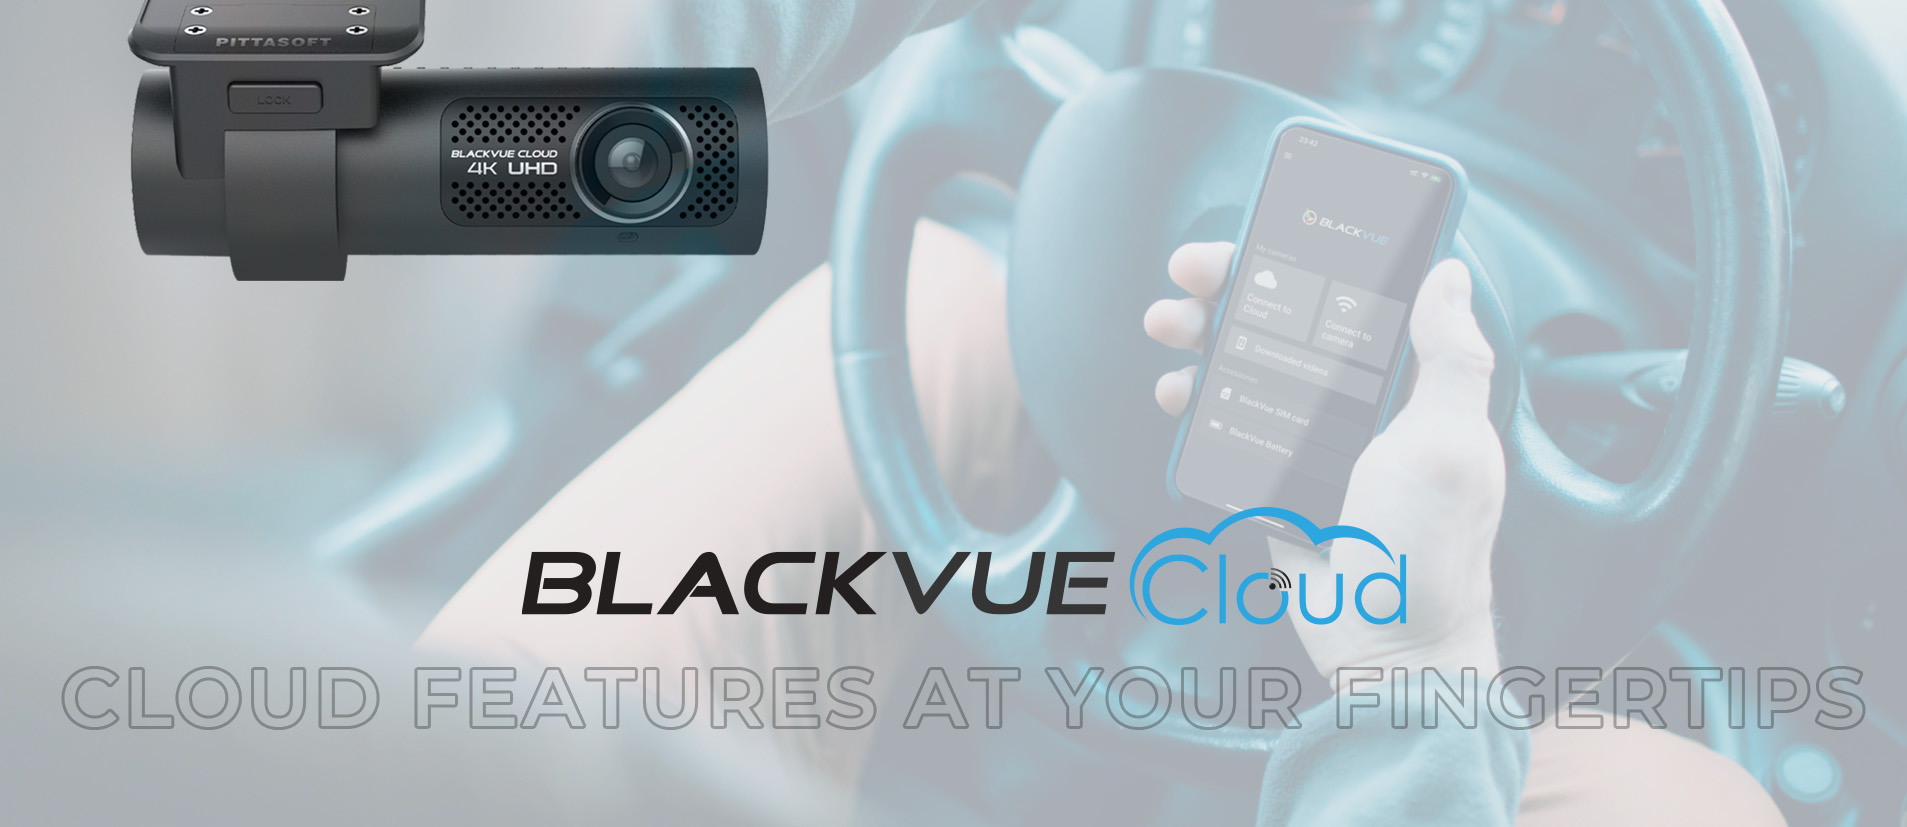  BlackVue DR900X-2CH with 32GB microSD Card, 4K UHD Cloud front  Dashcam, Built-in Wi-Fi, GPS, Parking Mode Voltage Monitor